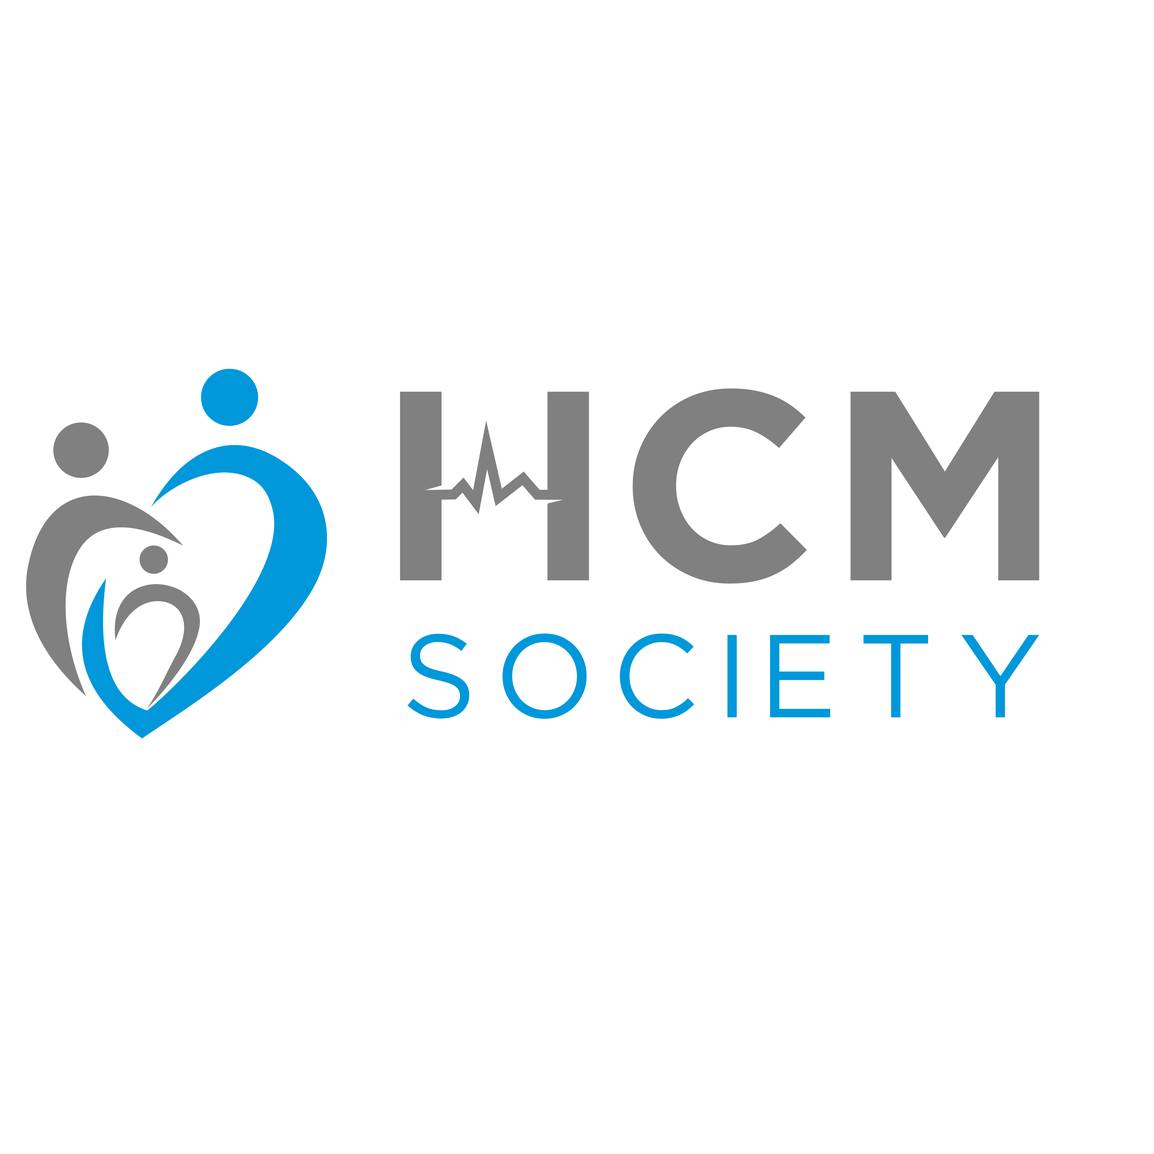 Great news! Announcing the launch of the Hypertrophic Cardiomyopathy Medical Society Inaugural Scientific Sessions. Learn more at hcmsociety.org 
#hypertrophiccardiomyopathy #FightHeartDisease